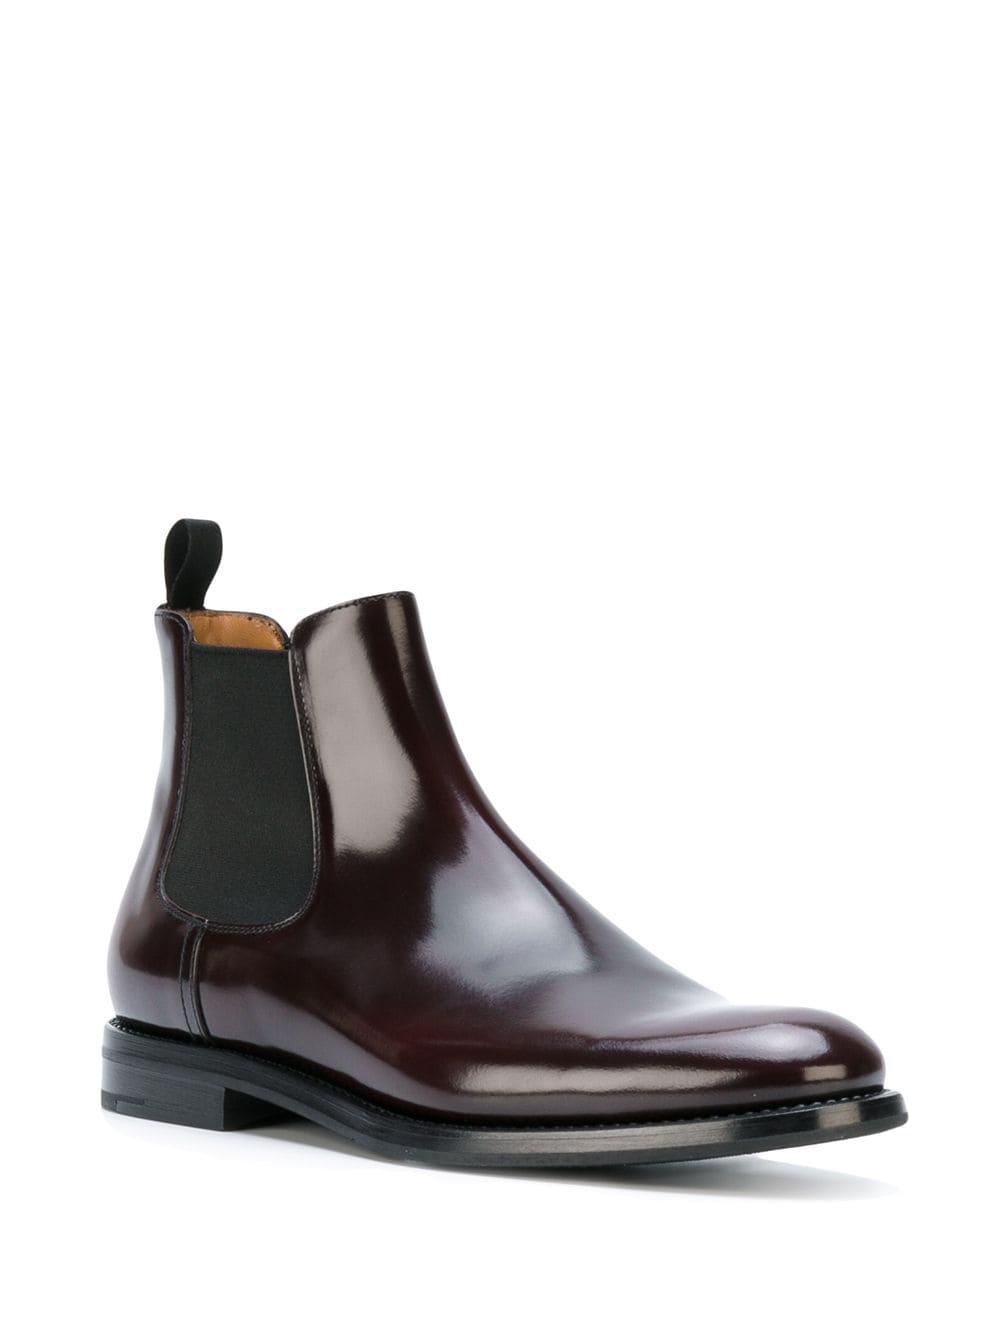 Church's Leather Monmouth Wg Chelsea Boots in Red - Lyst